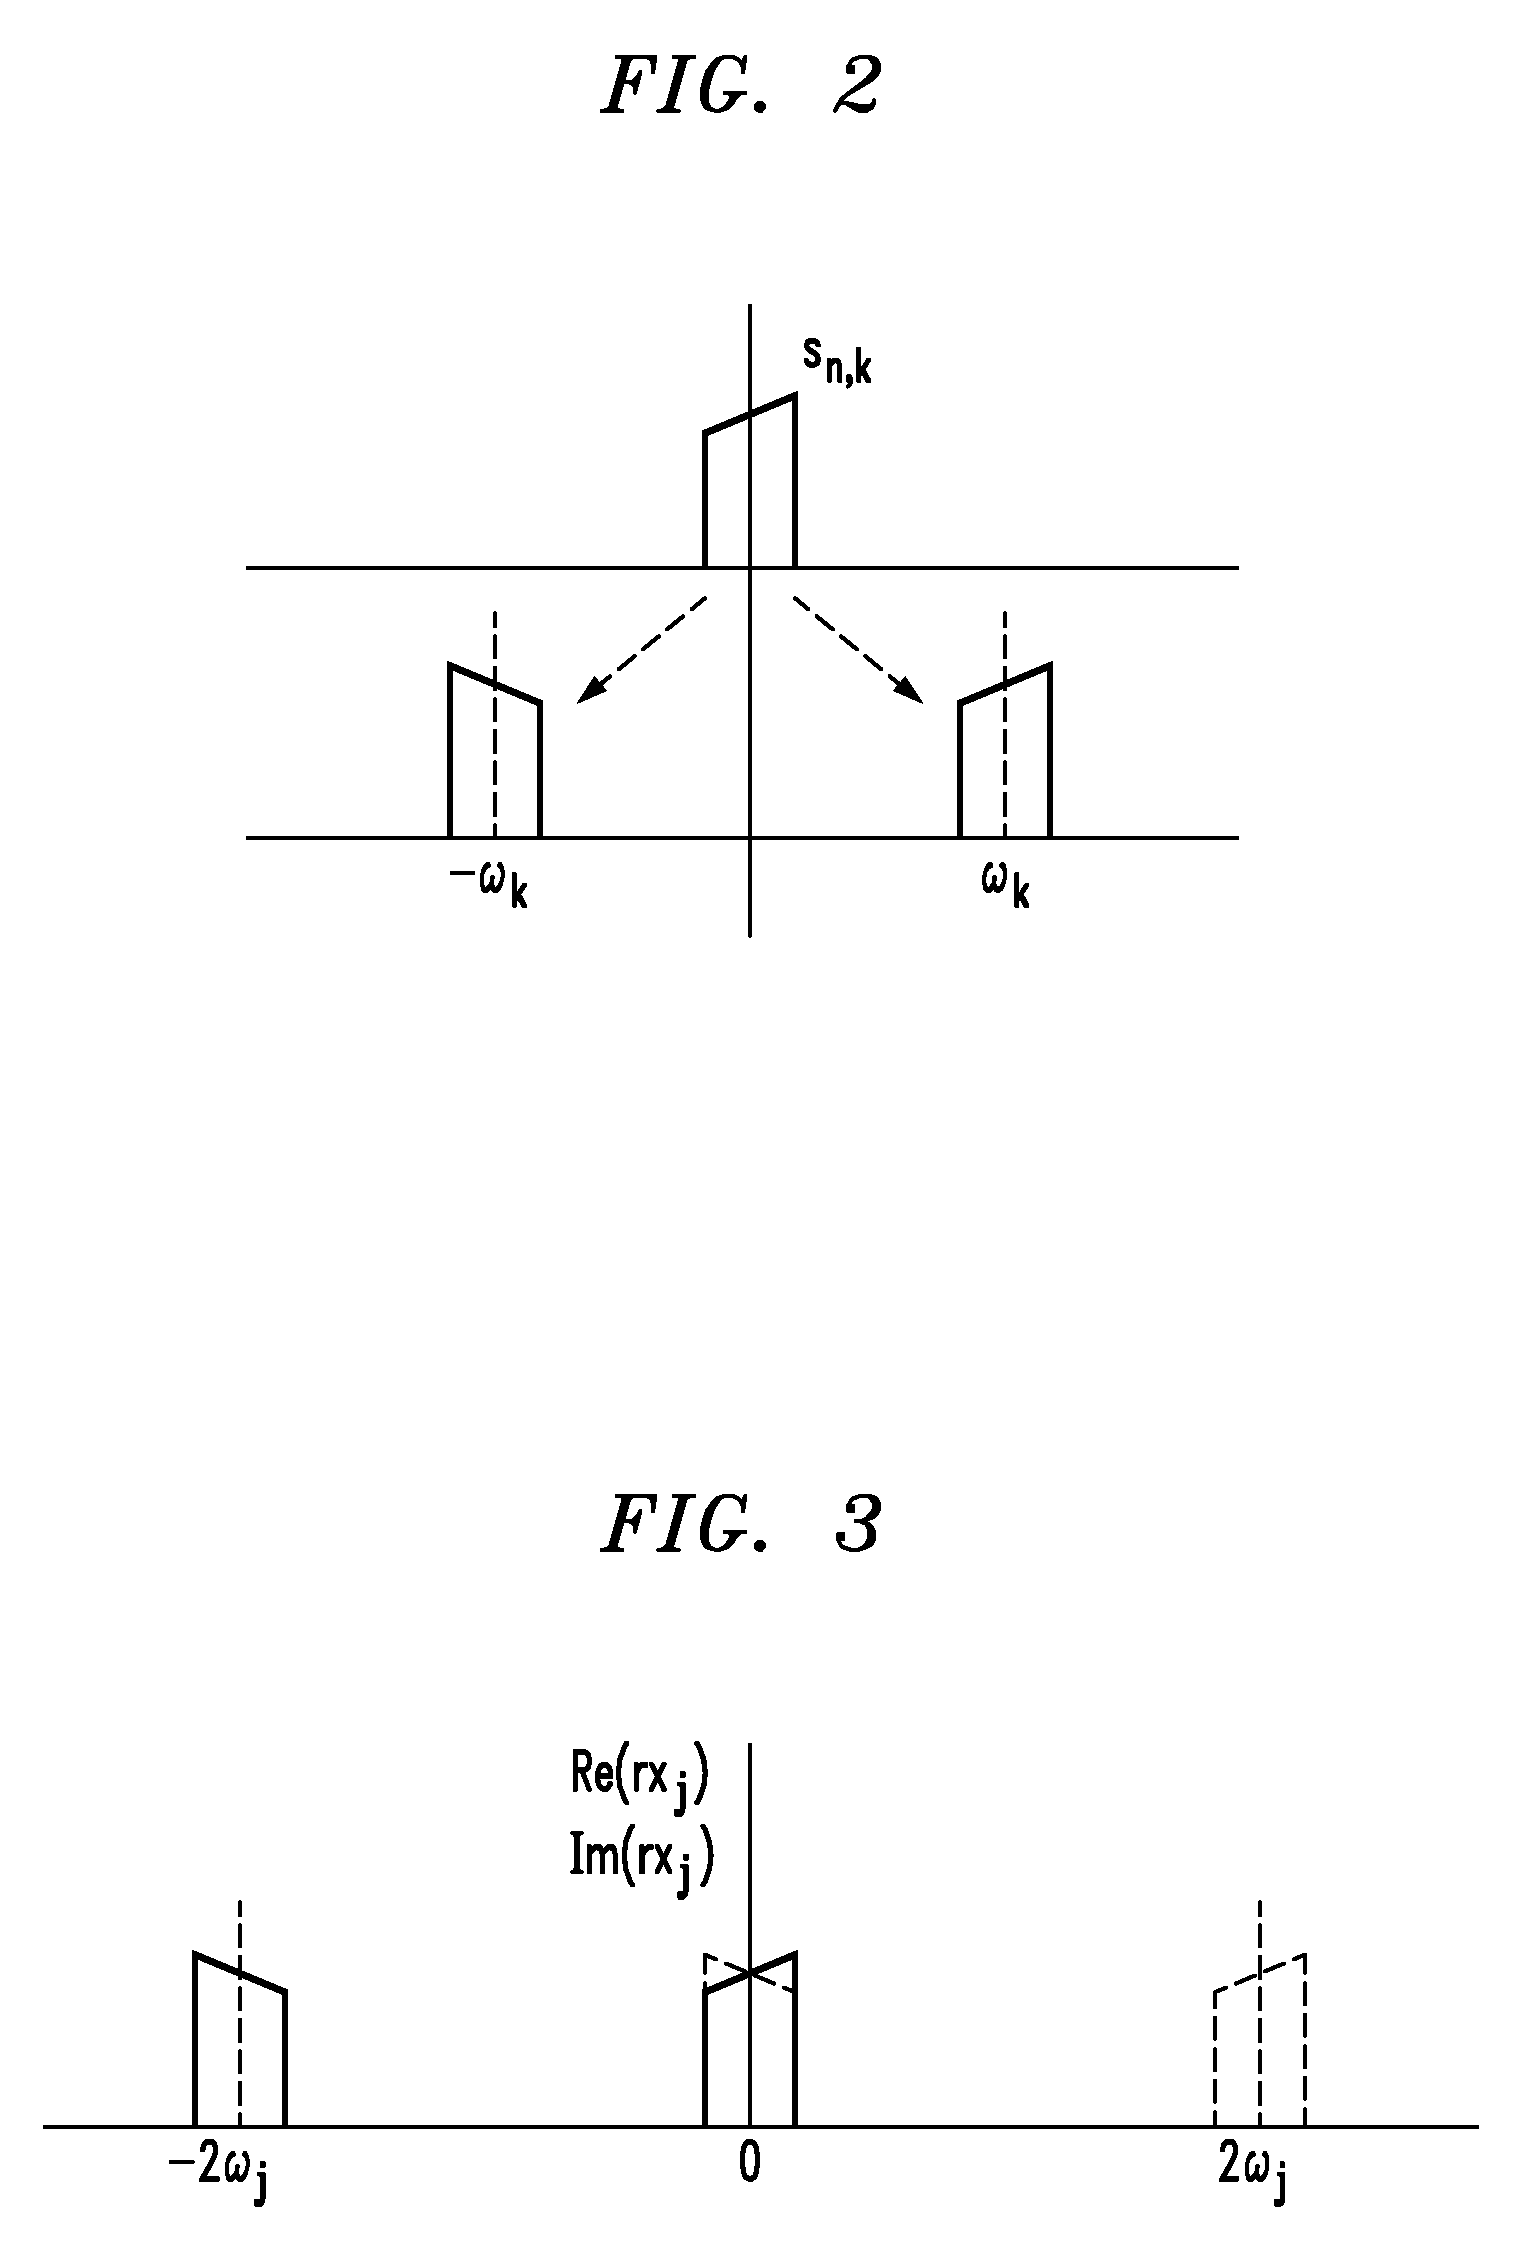 Method and apparatus for cross-talk cancellation in frequency division multiplexed transmission systems